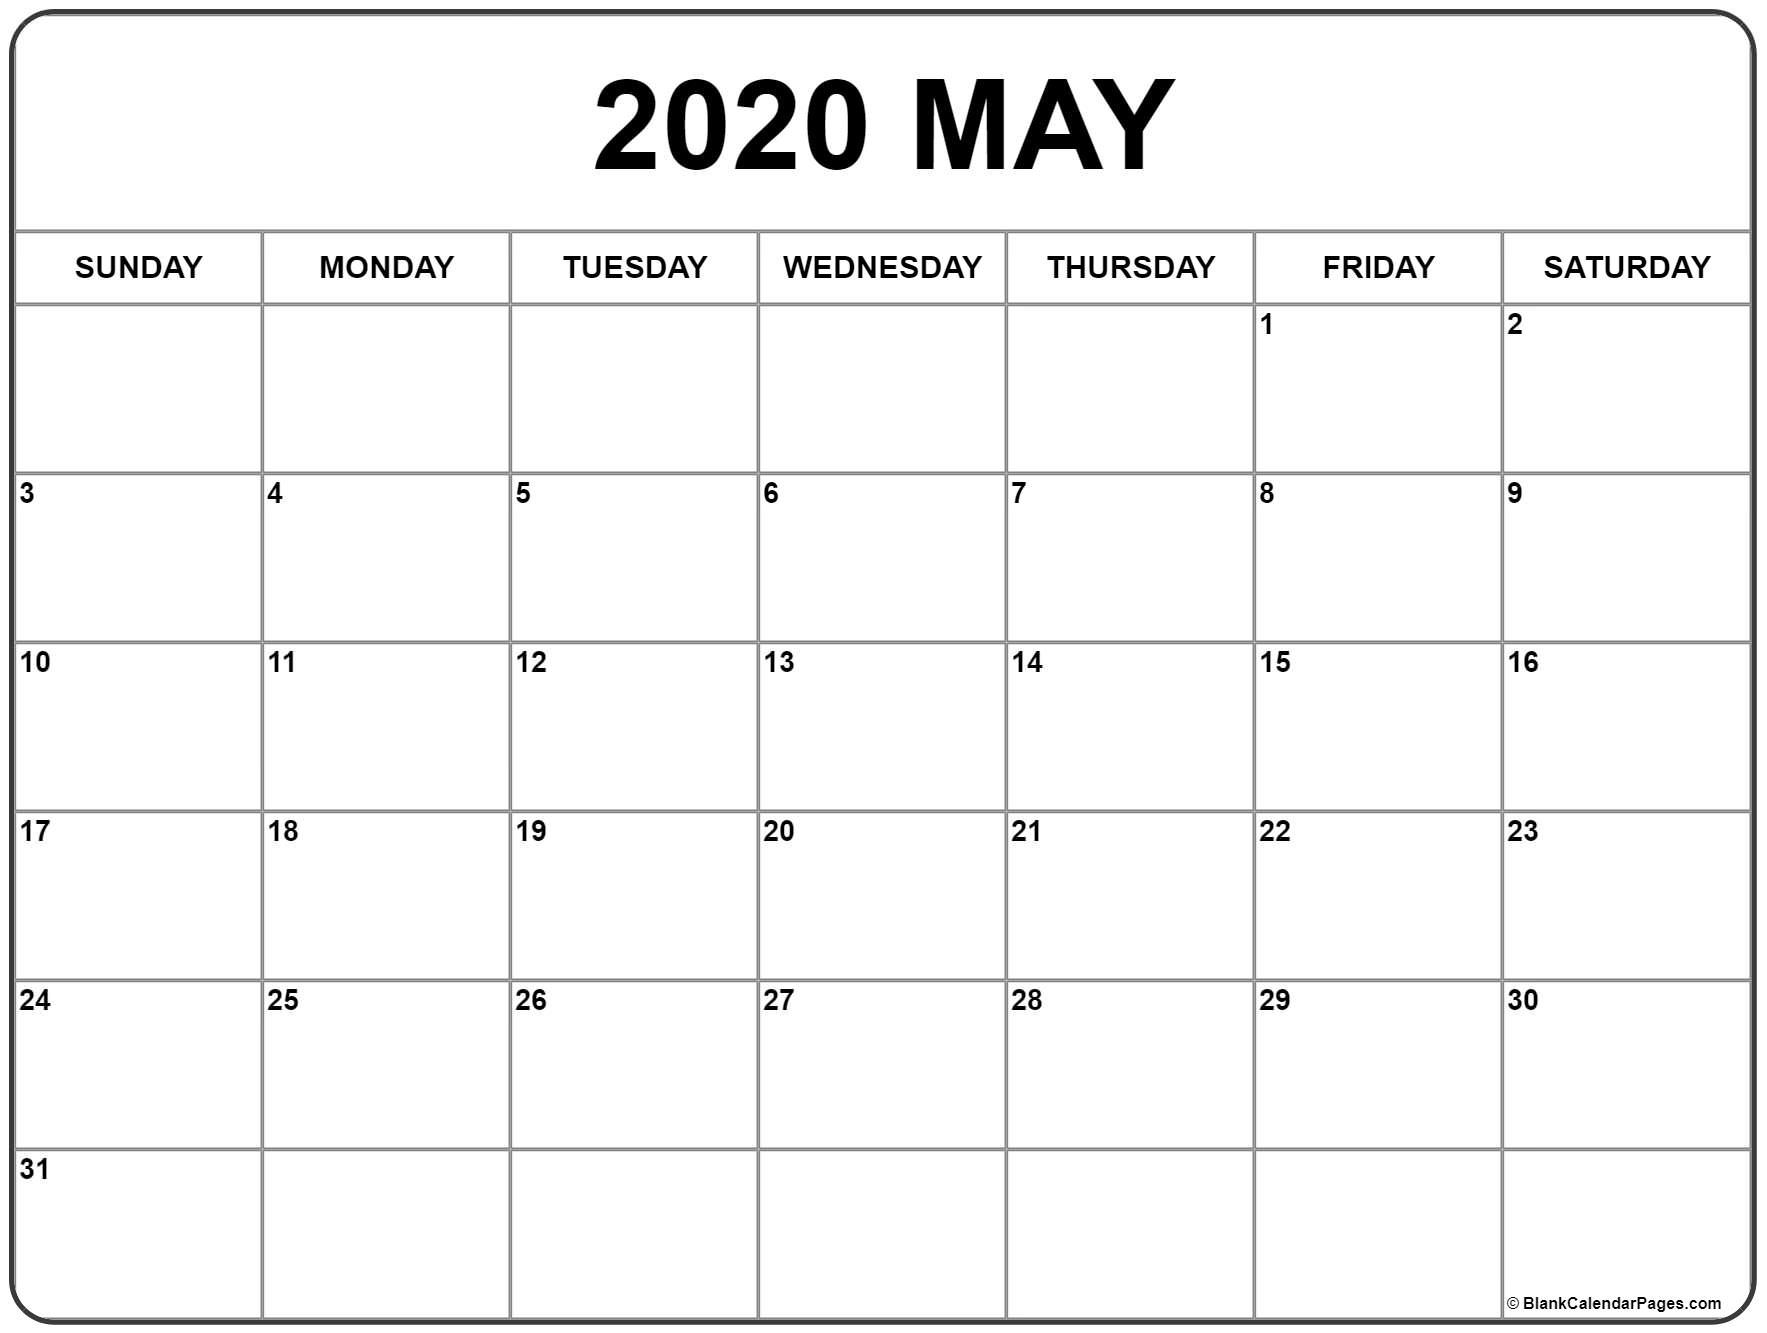 print free calendars without downloading 2020 calendar